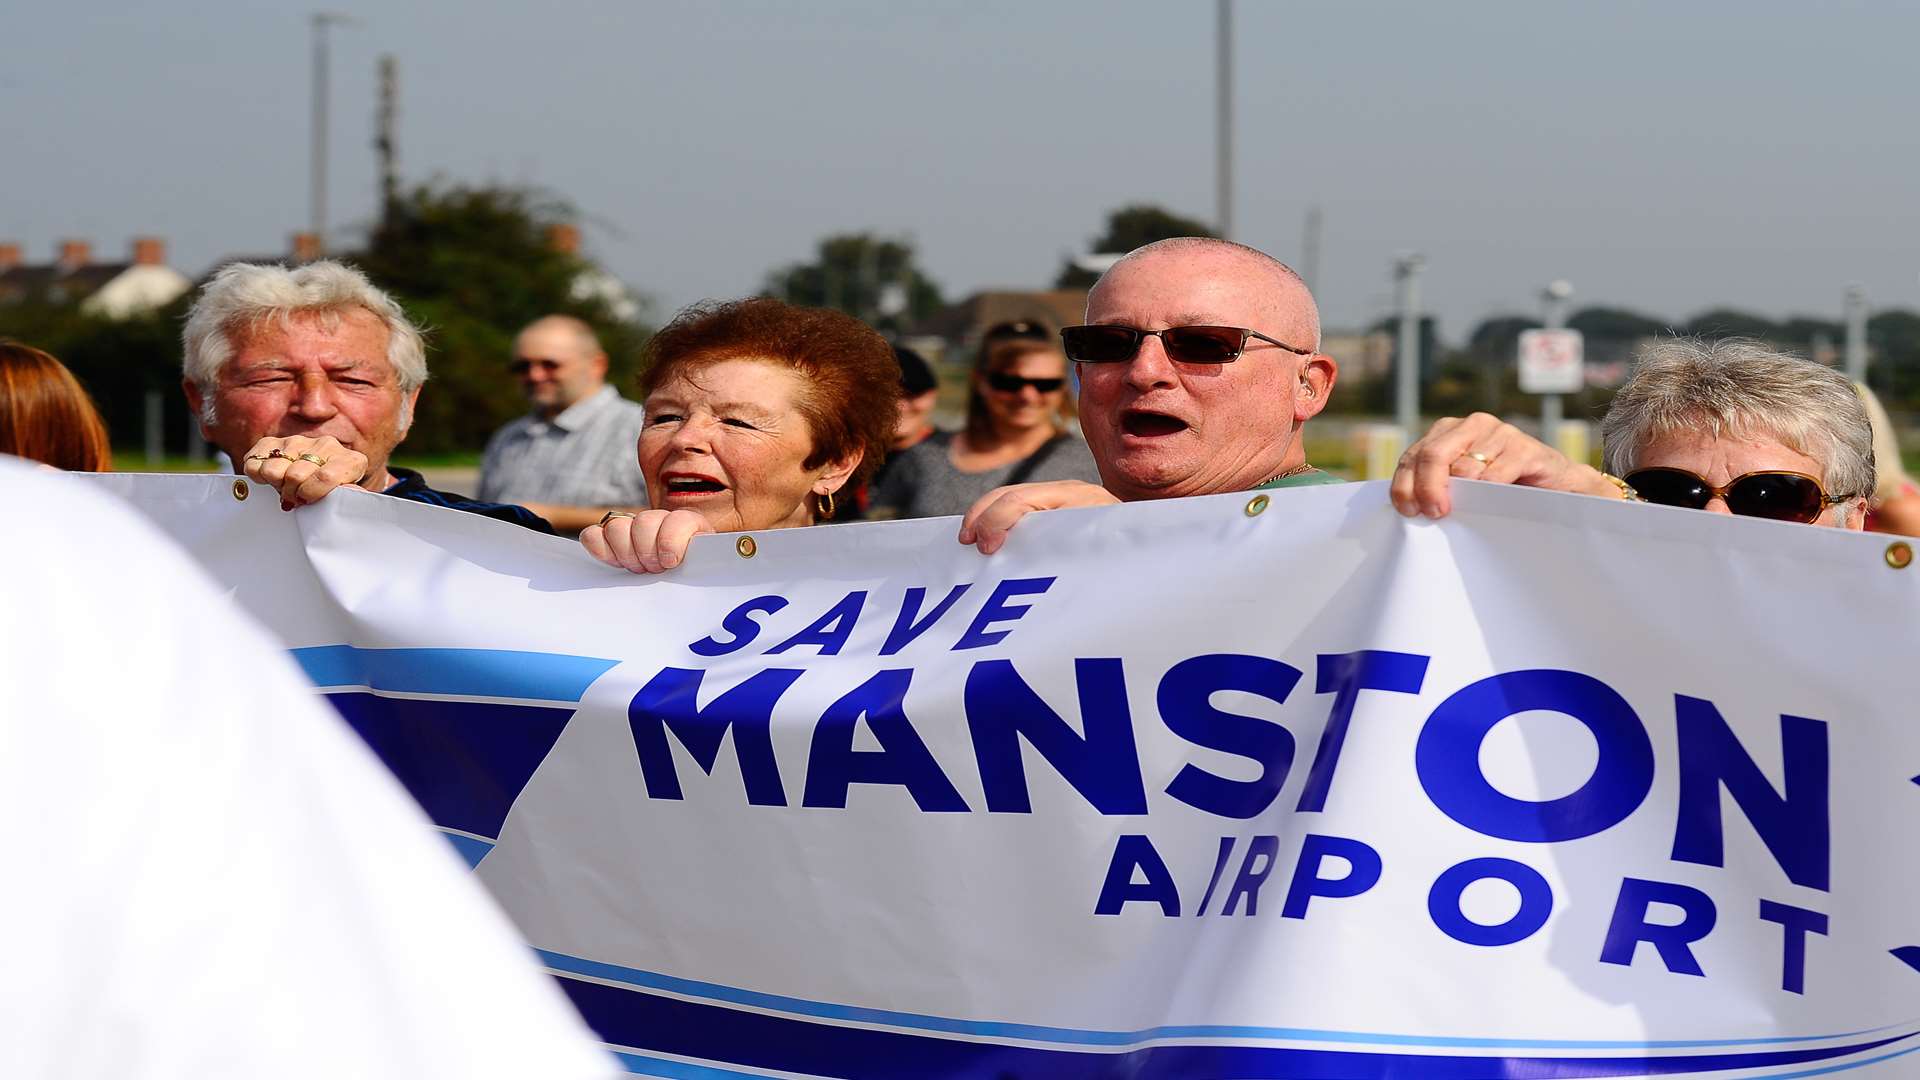 Members of the Save Manston Airport campaign group